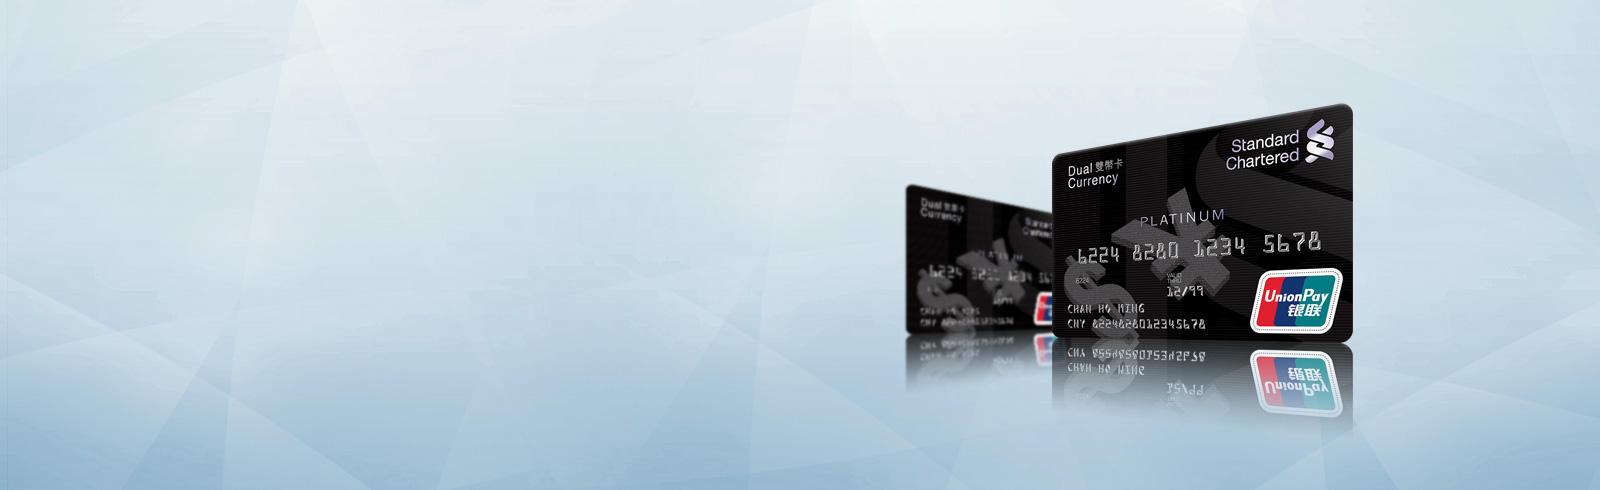 Standard Chartered UnionPay Dual Currency Platinum Credit Card